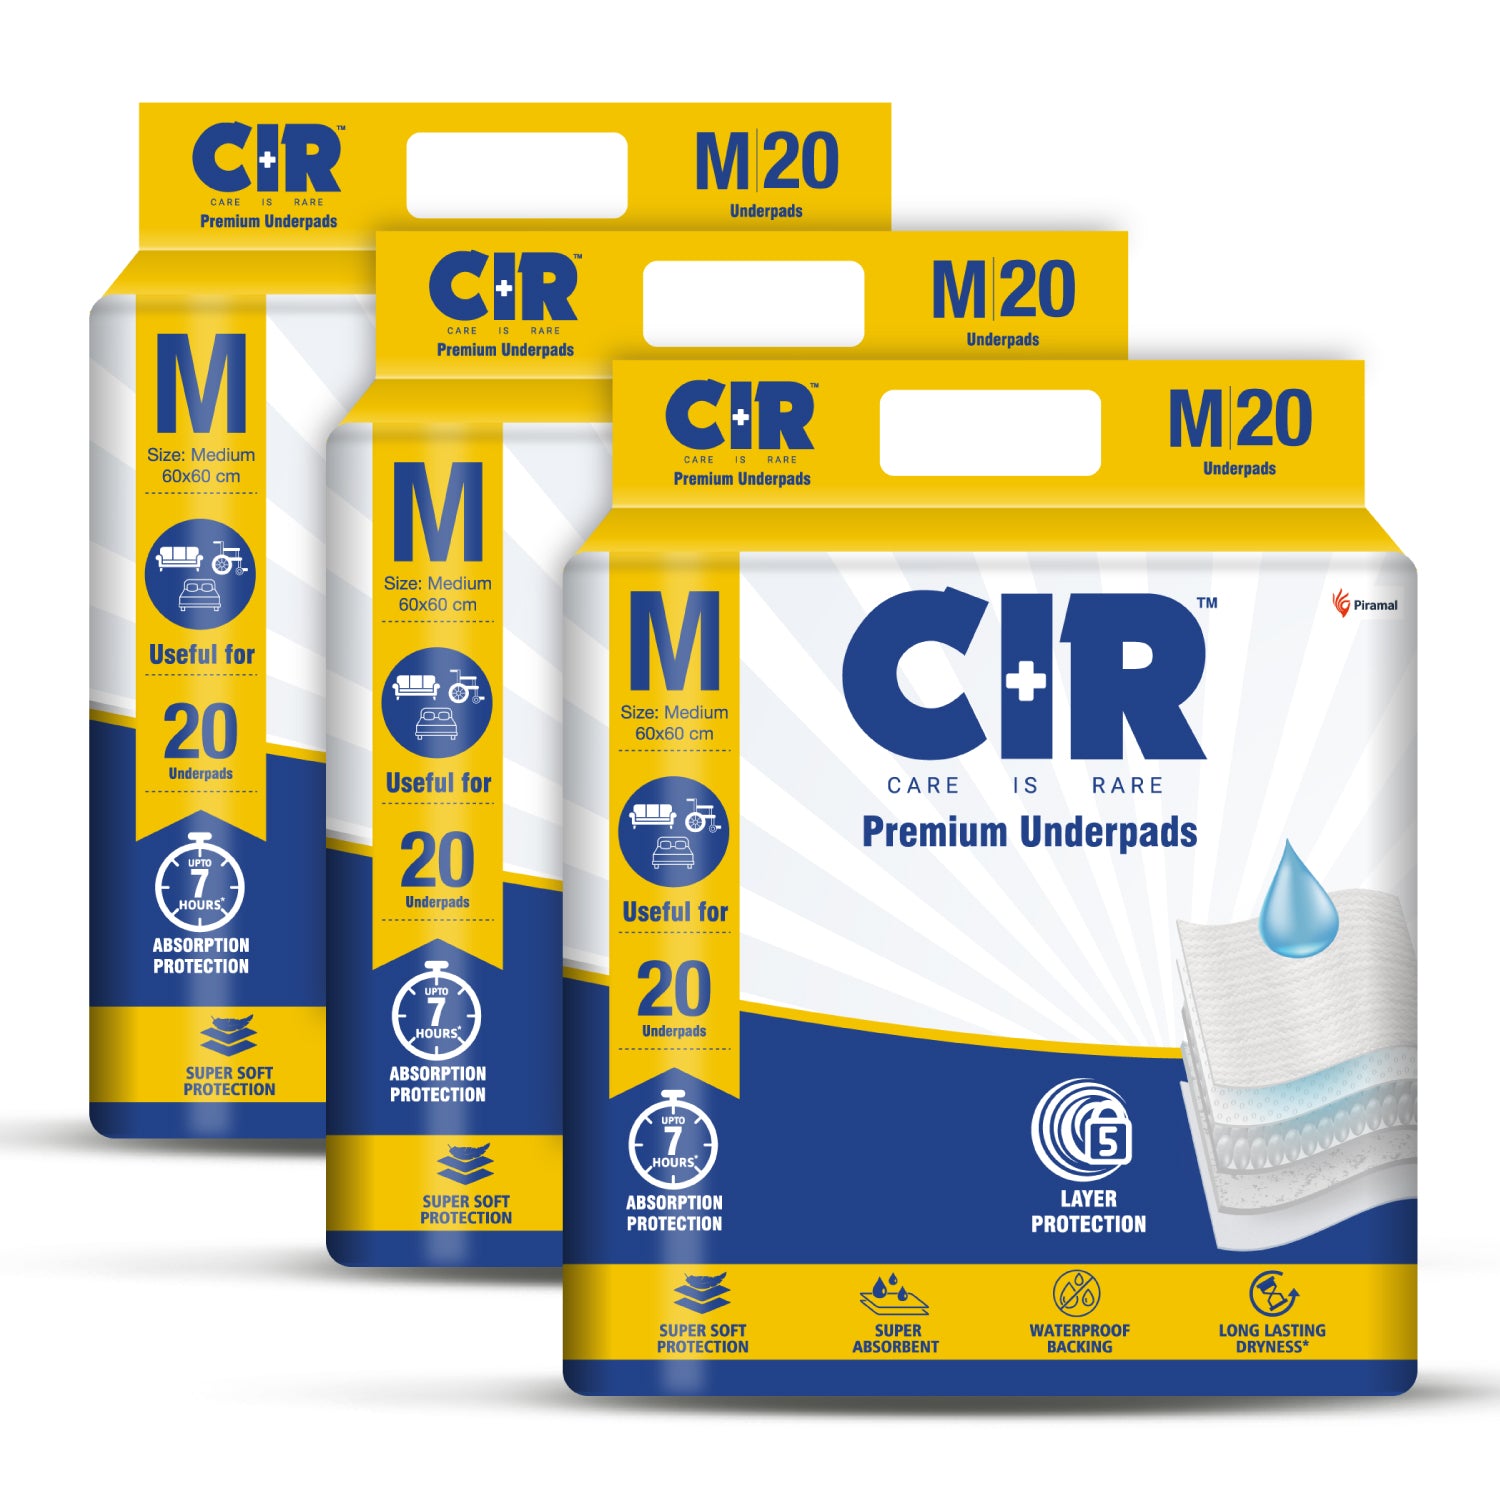 CIR Premium Underpads, Medium (60x60cm) | 7 hrs Absorption Protection | 20 Units | Waterproof | Protects surfaces from incontinence | Super Soft Polymer